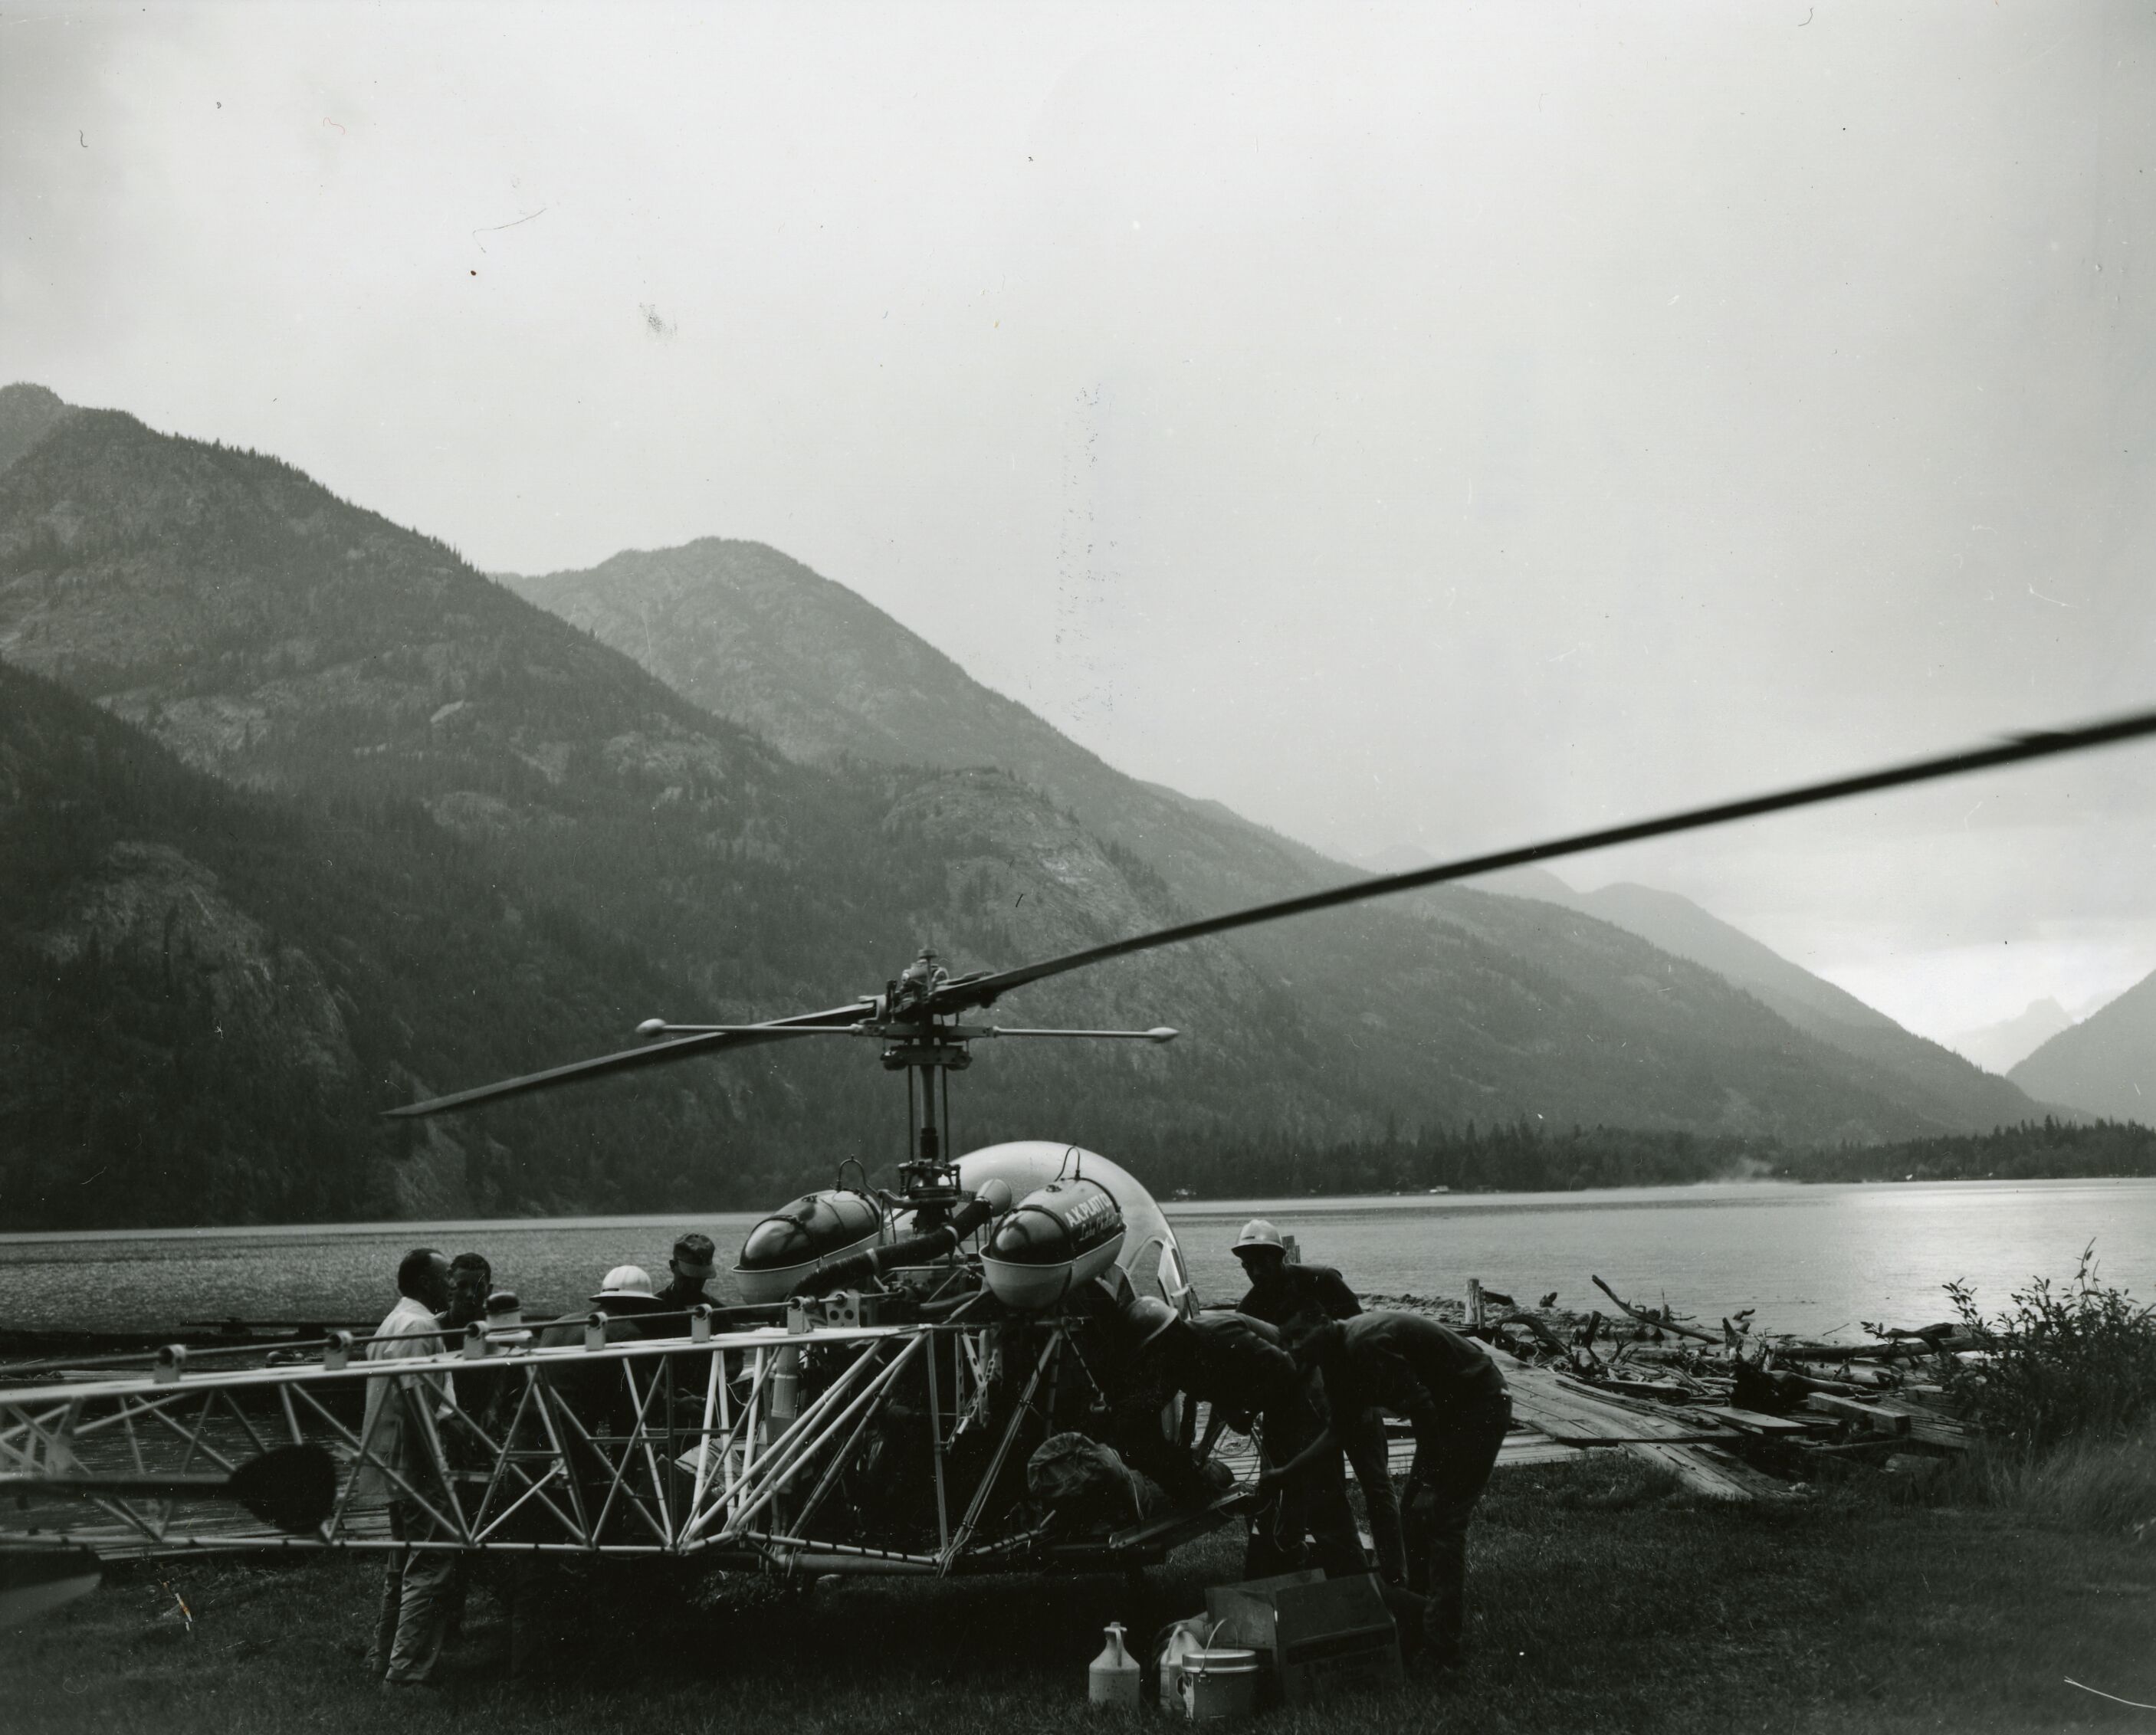 Several people crowded around a helicopter.  A lake and low mountain ridges are in the background.